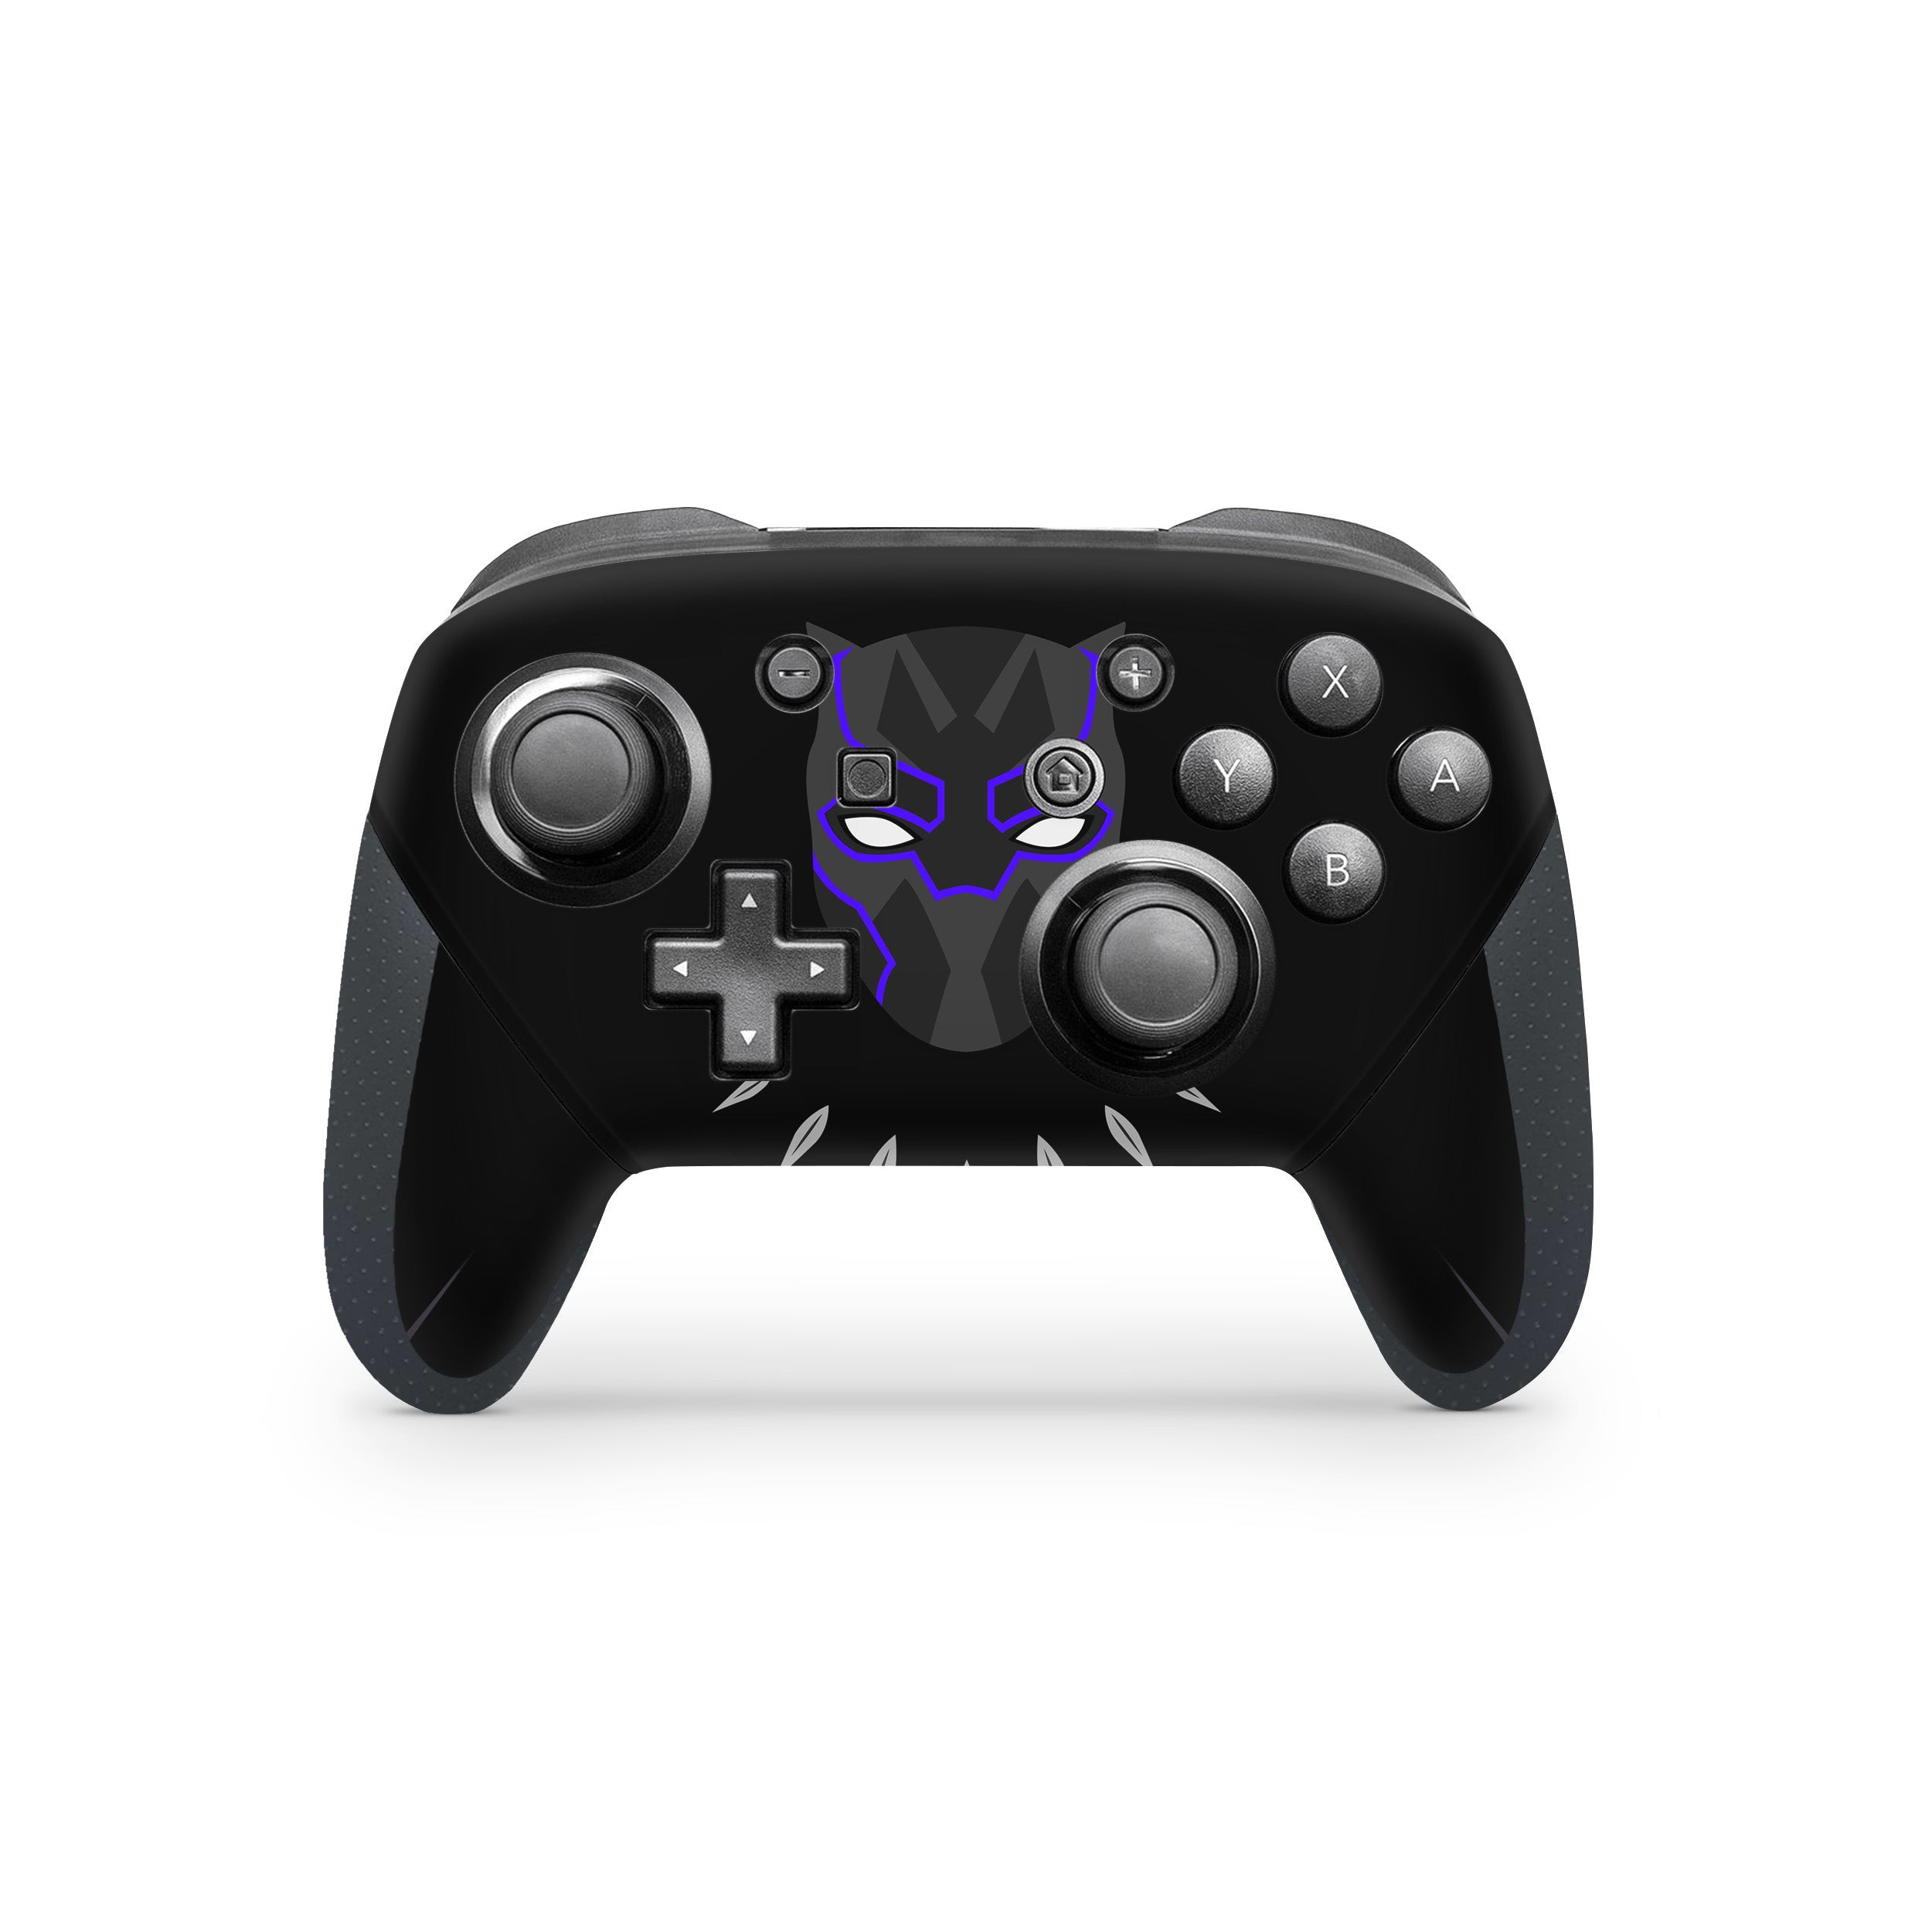 A video game skin featuring a Marvel Comics Black Panther design for the Switch Pro Controller.